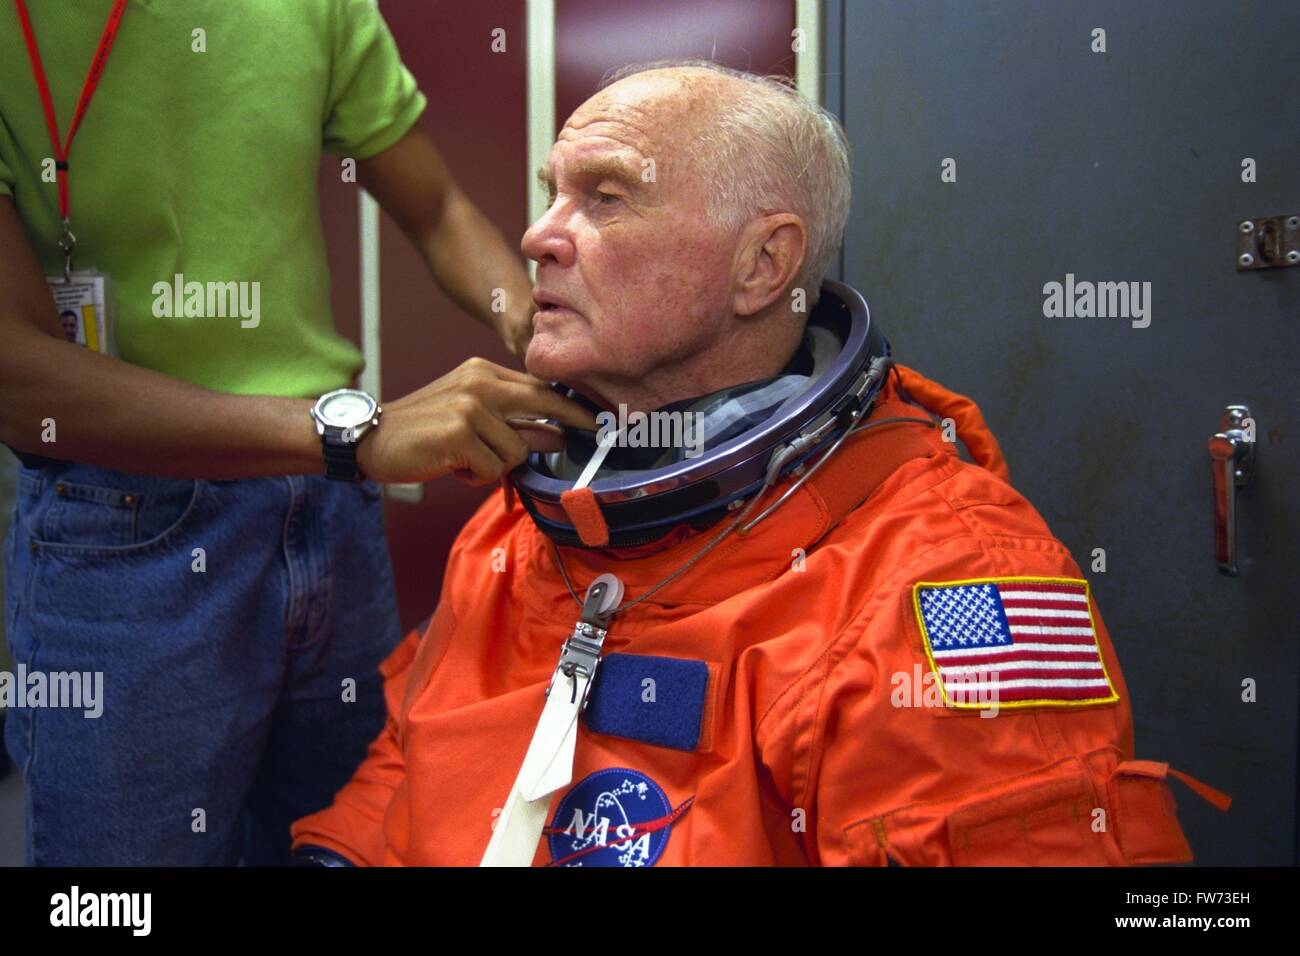 U.S. Senator and astronaut John Glenn is assisted in suiting up for a training exercise at the systems integration facility at the Johnson Space Center April 28, 1998 in Houston, Texas. Glenn who first flew in space in 1962 is scheduled to join the Space Shuttle Discovery STS-95 flight. Stock Photo